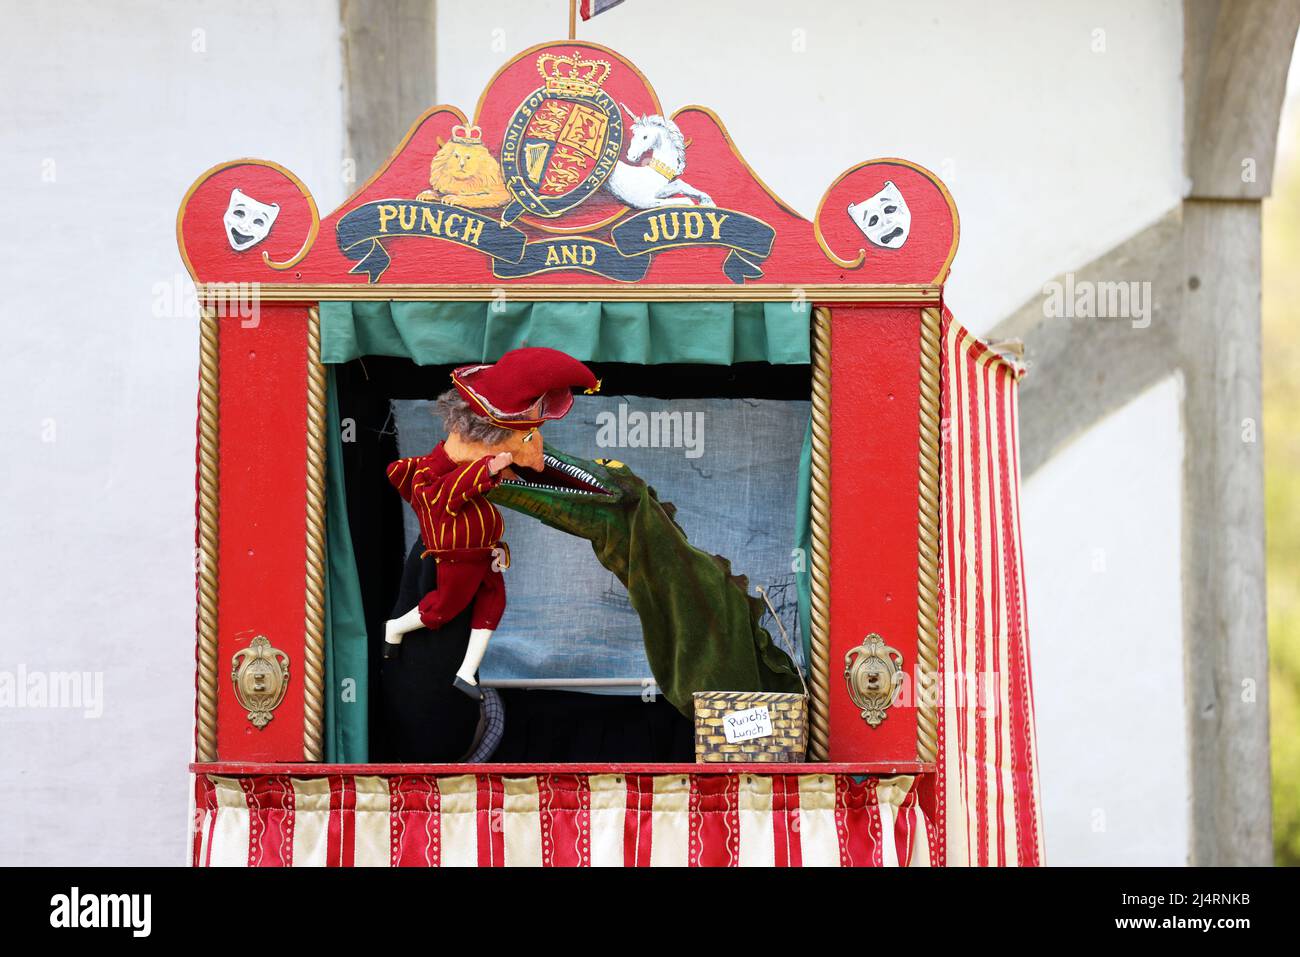 A Punch and Judy Show pictured taking place at the Weald & Downland Museum in Singleton, Chichester, West Sussex, UK. Stock Photo